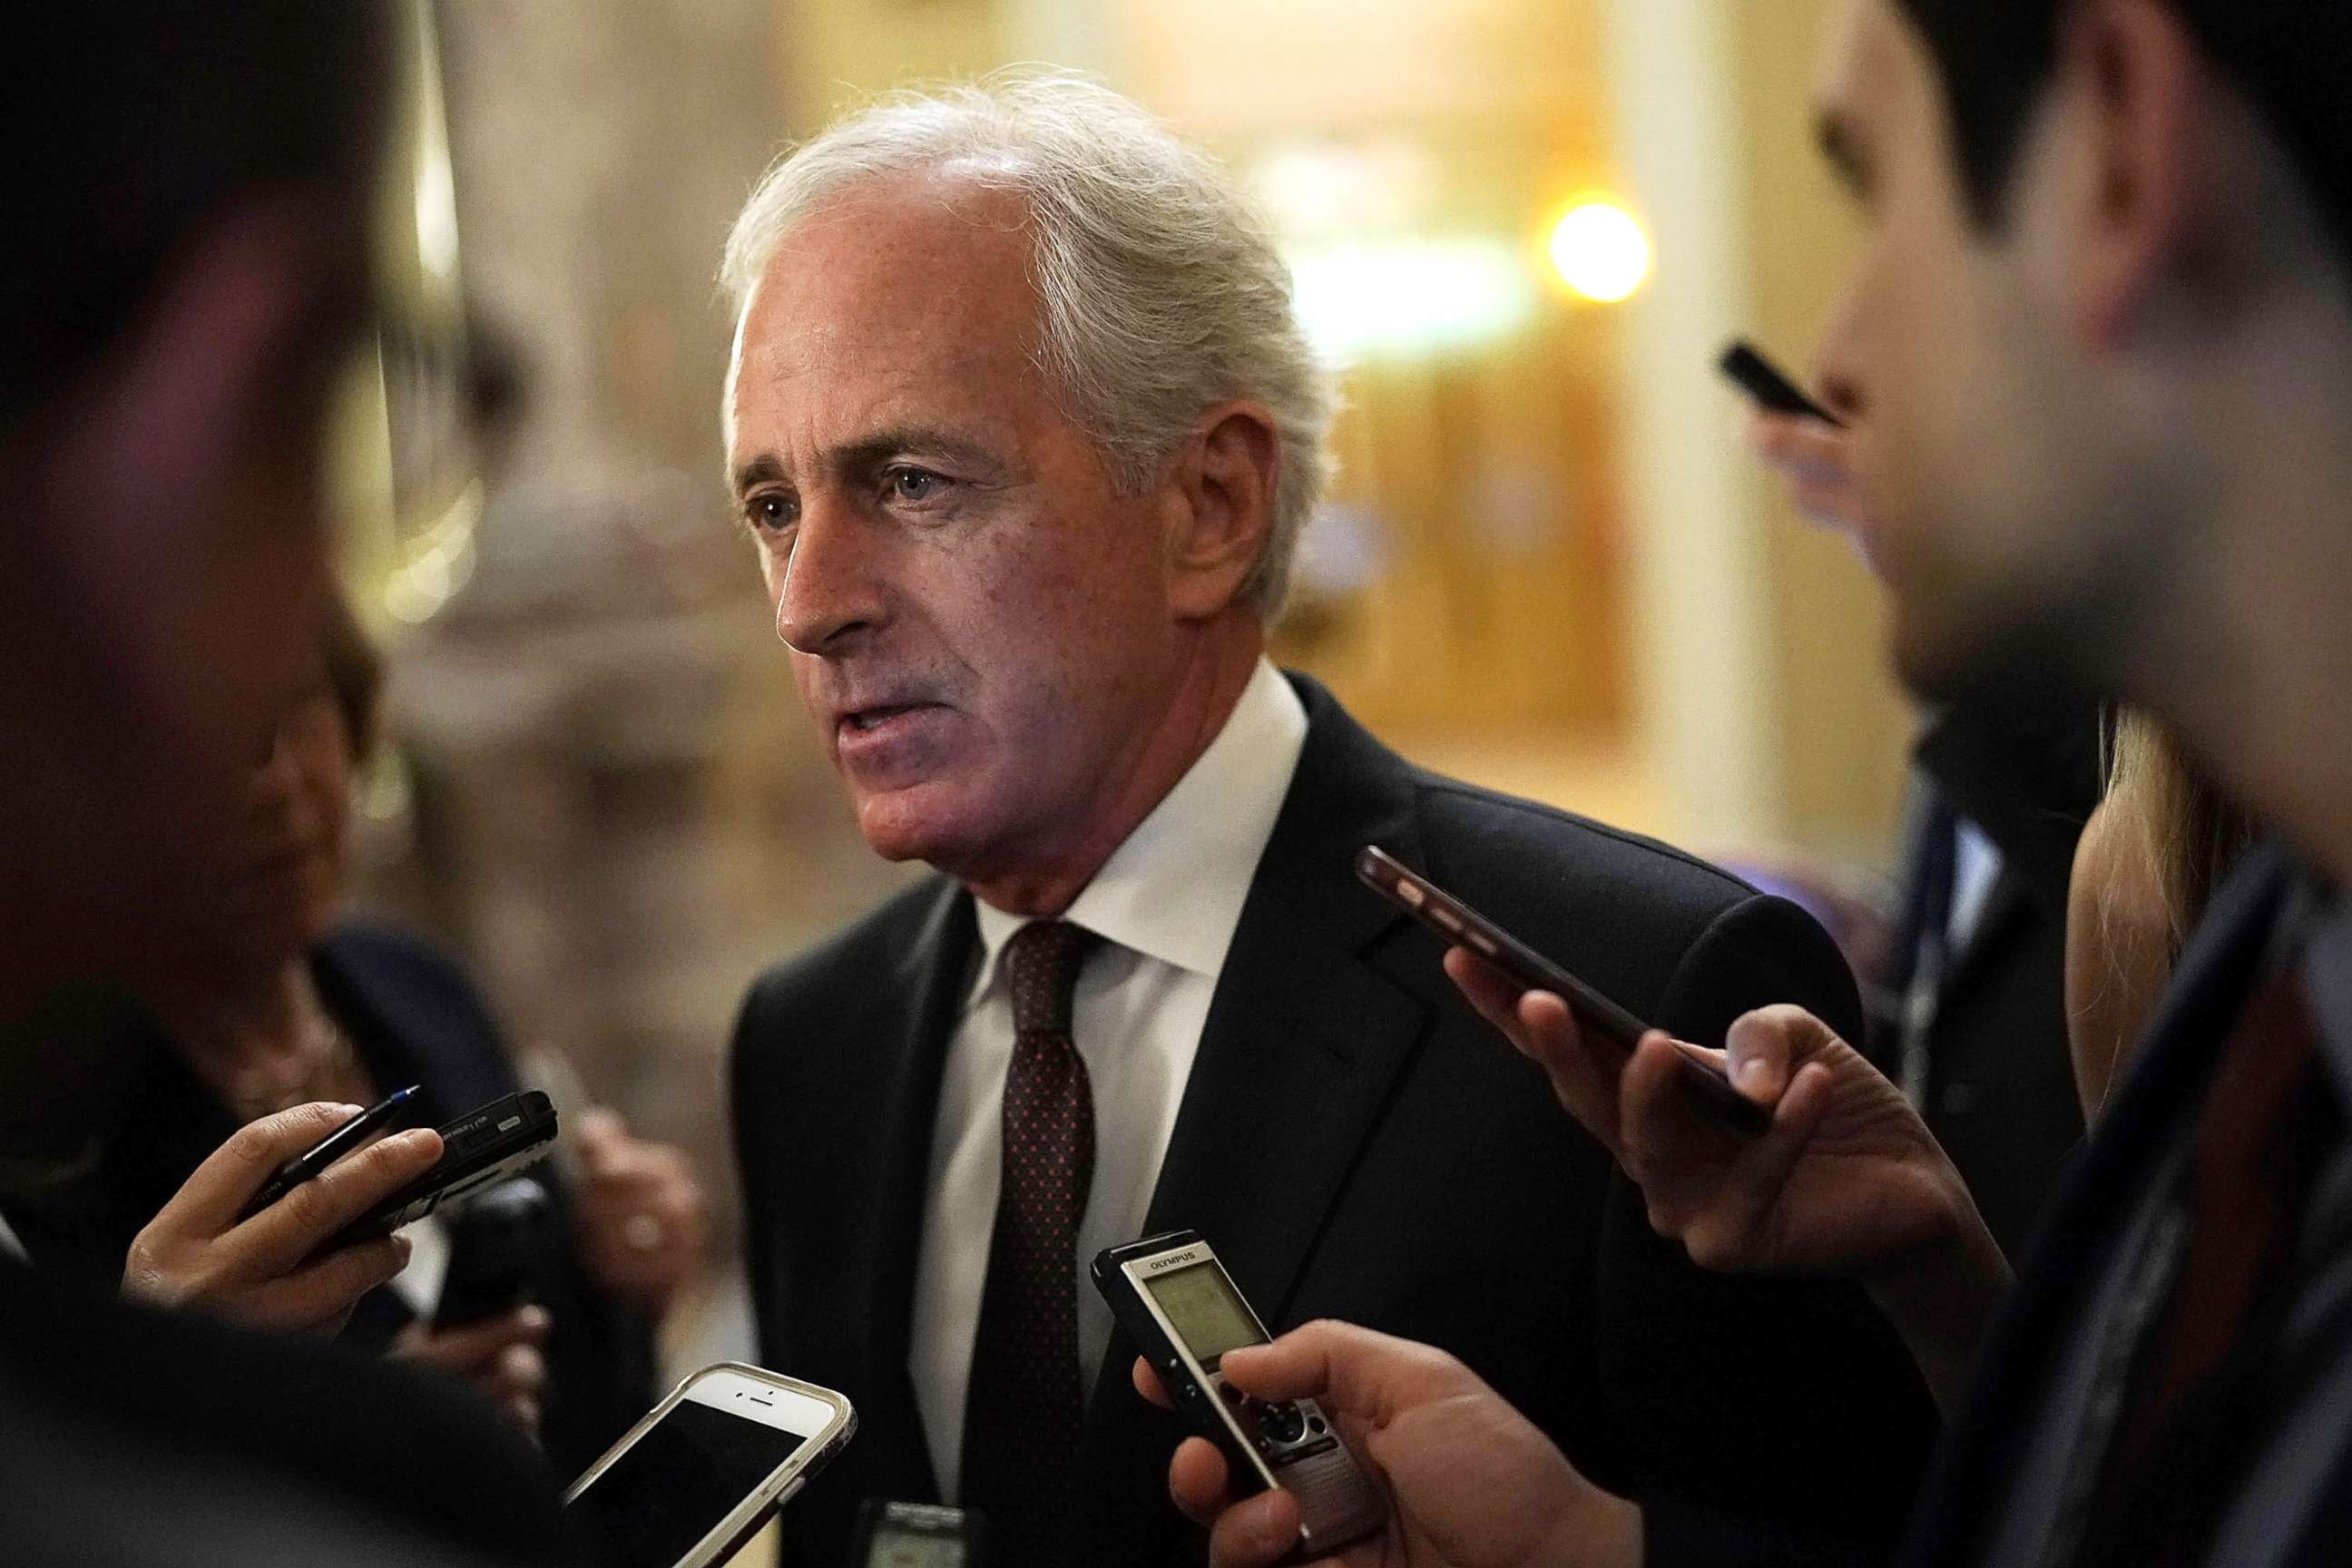 PHOTO: Sen. Bob Corker speaks to members of the media after a weekly Senate Republican Policy Luncheon at the Capitol May 8, 2018 in Washington.